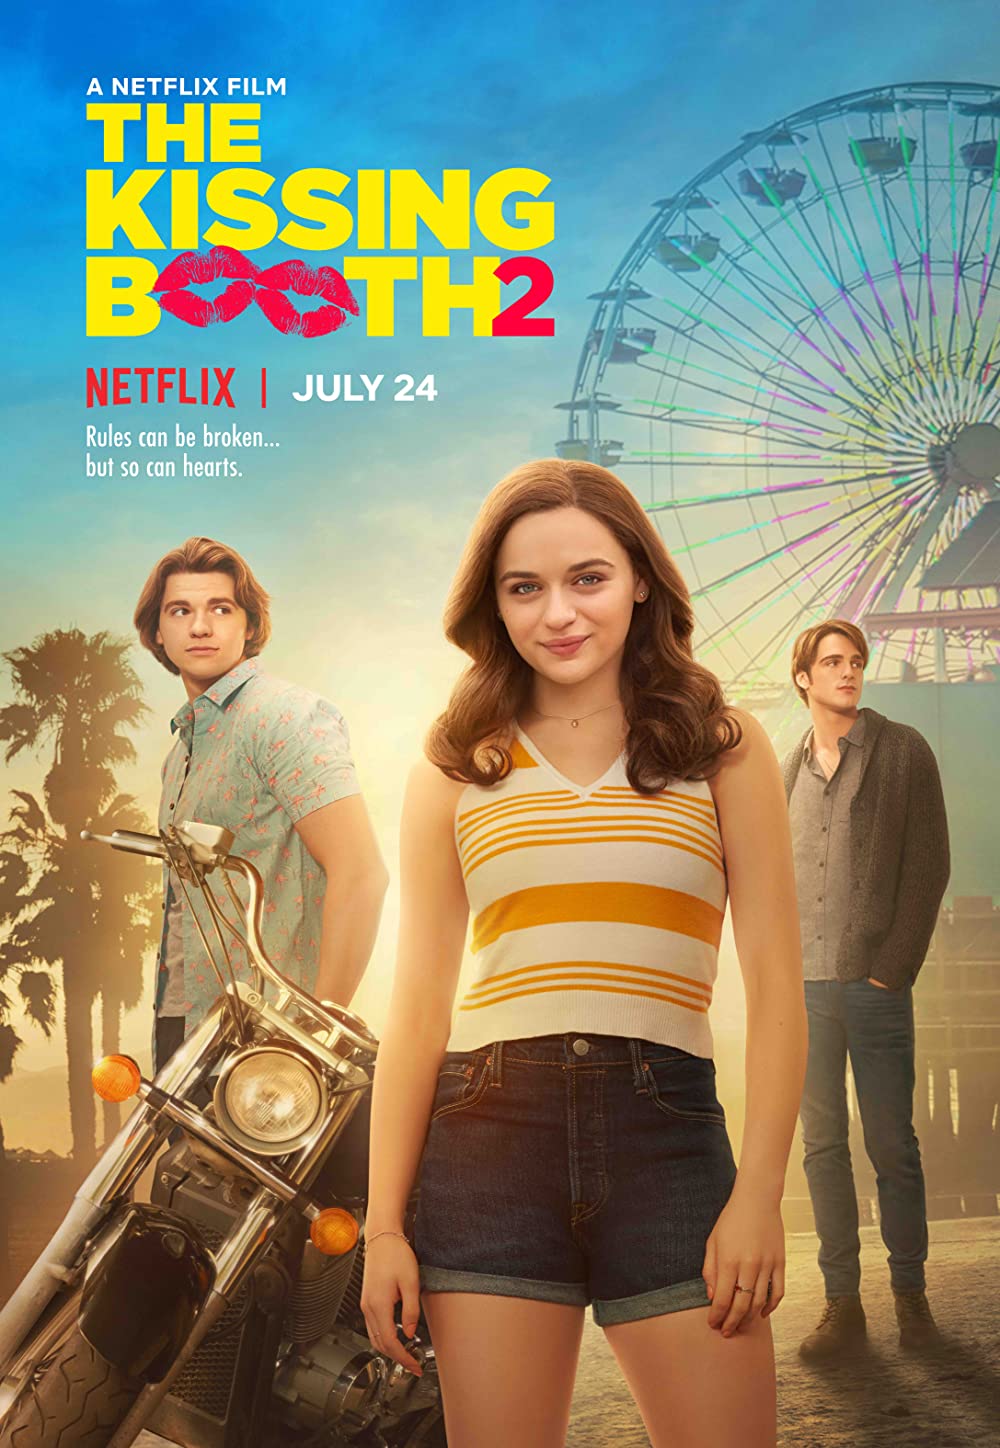 Download The Kissing Booth 2 (2020) Dual Audio {Hindi ORG+English} WEB DL ESubs 1080p [2GB] | 720p | [900MB] | 480p [350MB] download